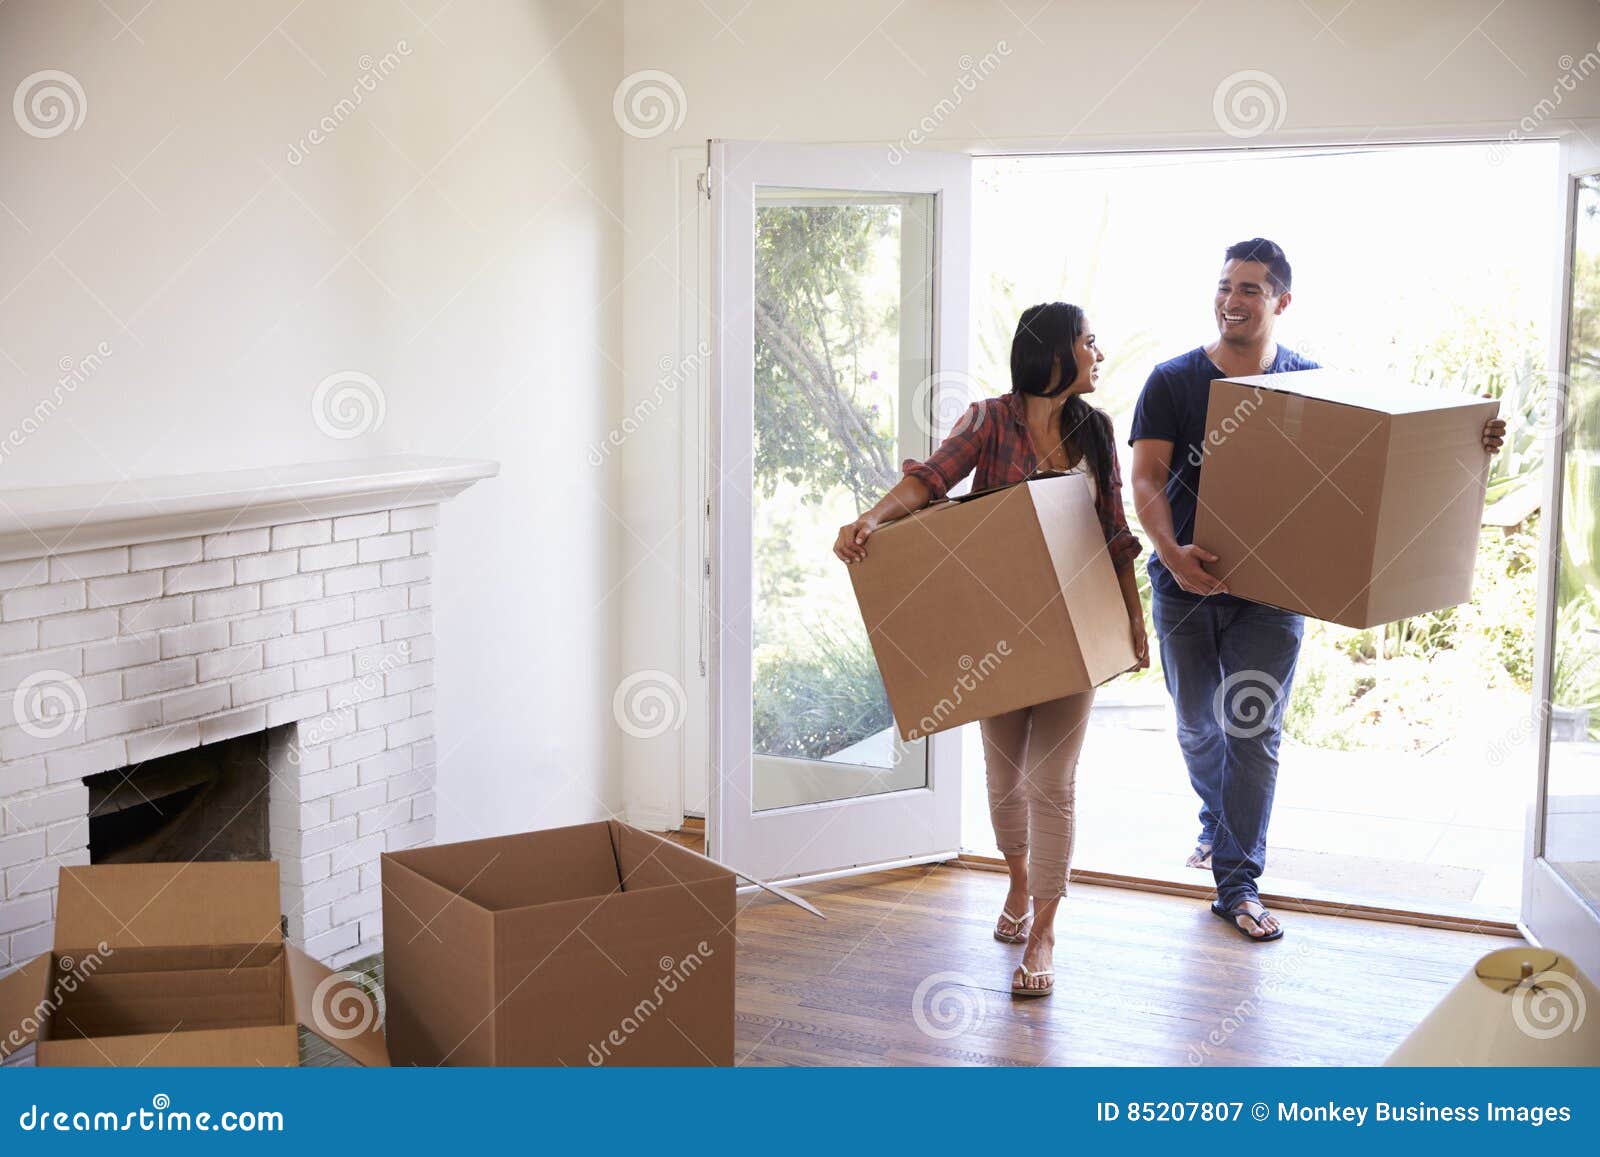 couple carrying boxes into new home on moving day